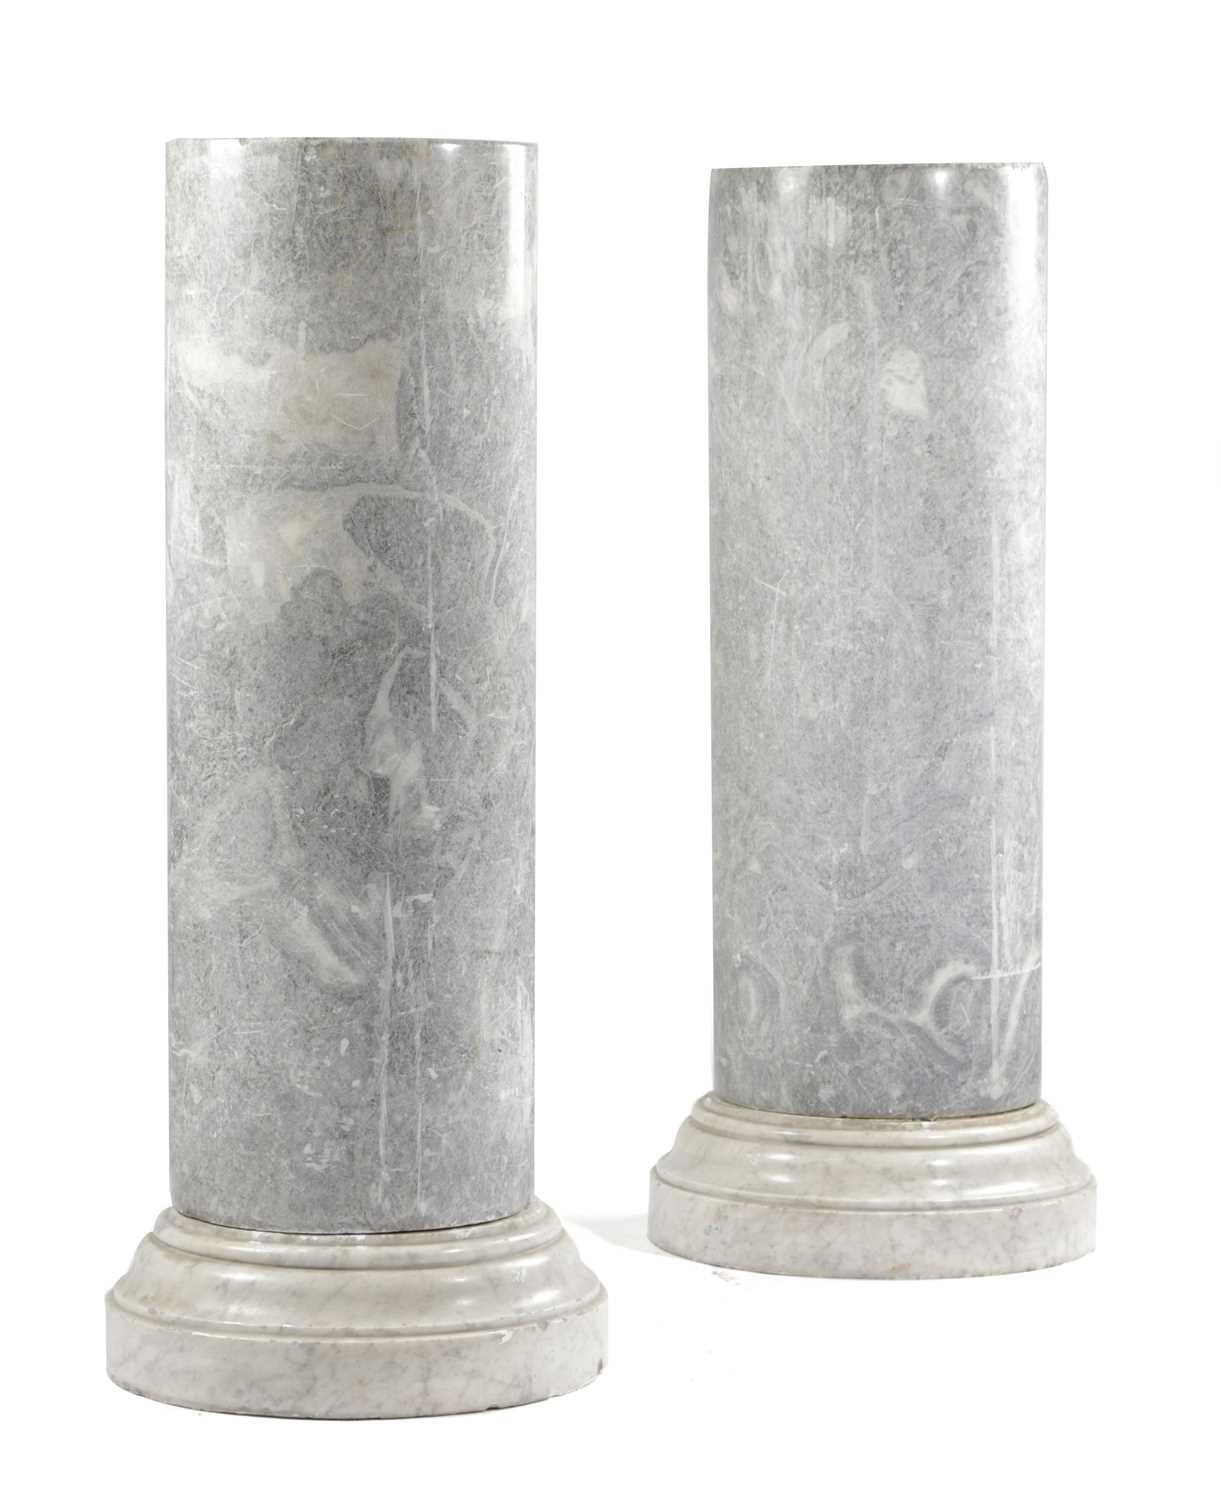 A PAIR OF GREY MARBLE COLUMNS 19TH CENTURY of cylindrical form, on white marble plinths (4) 105cm